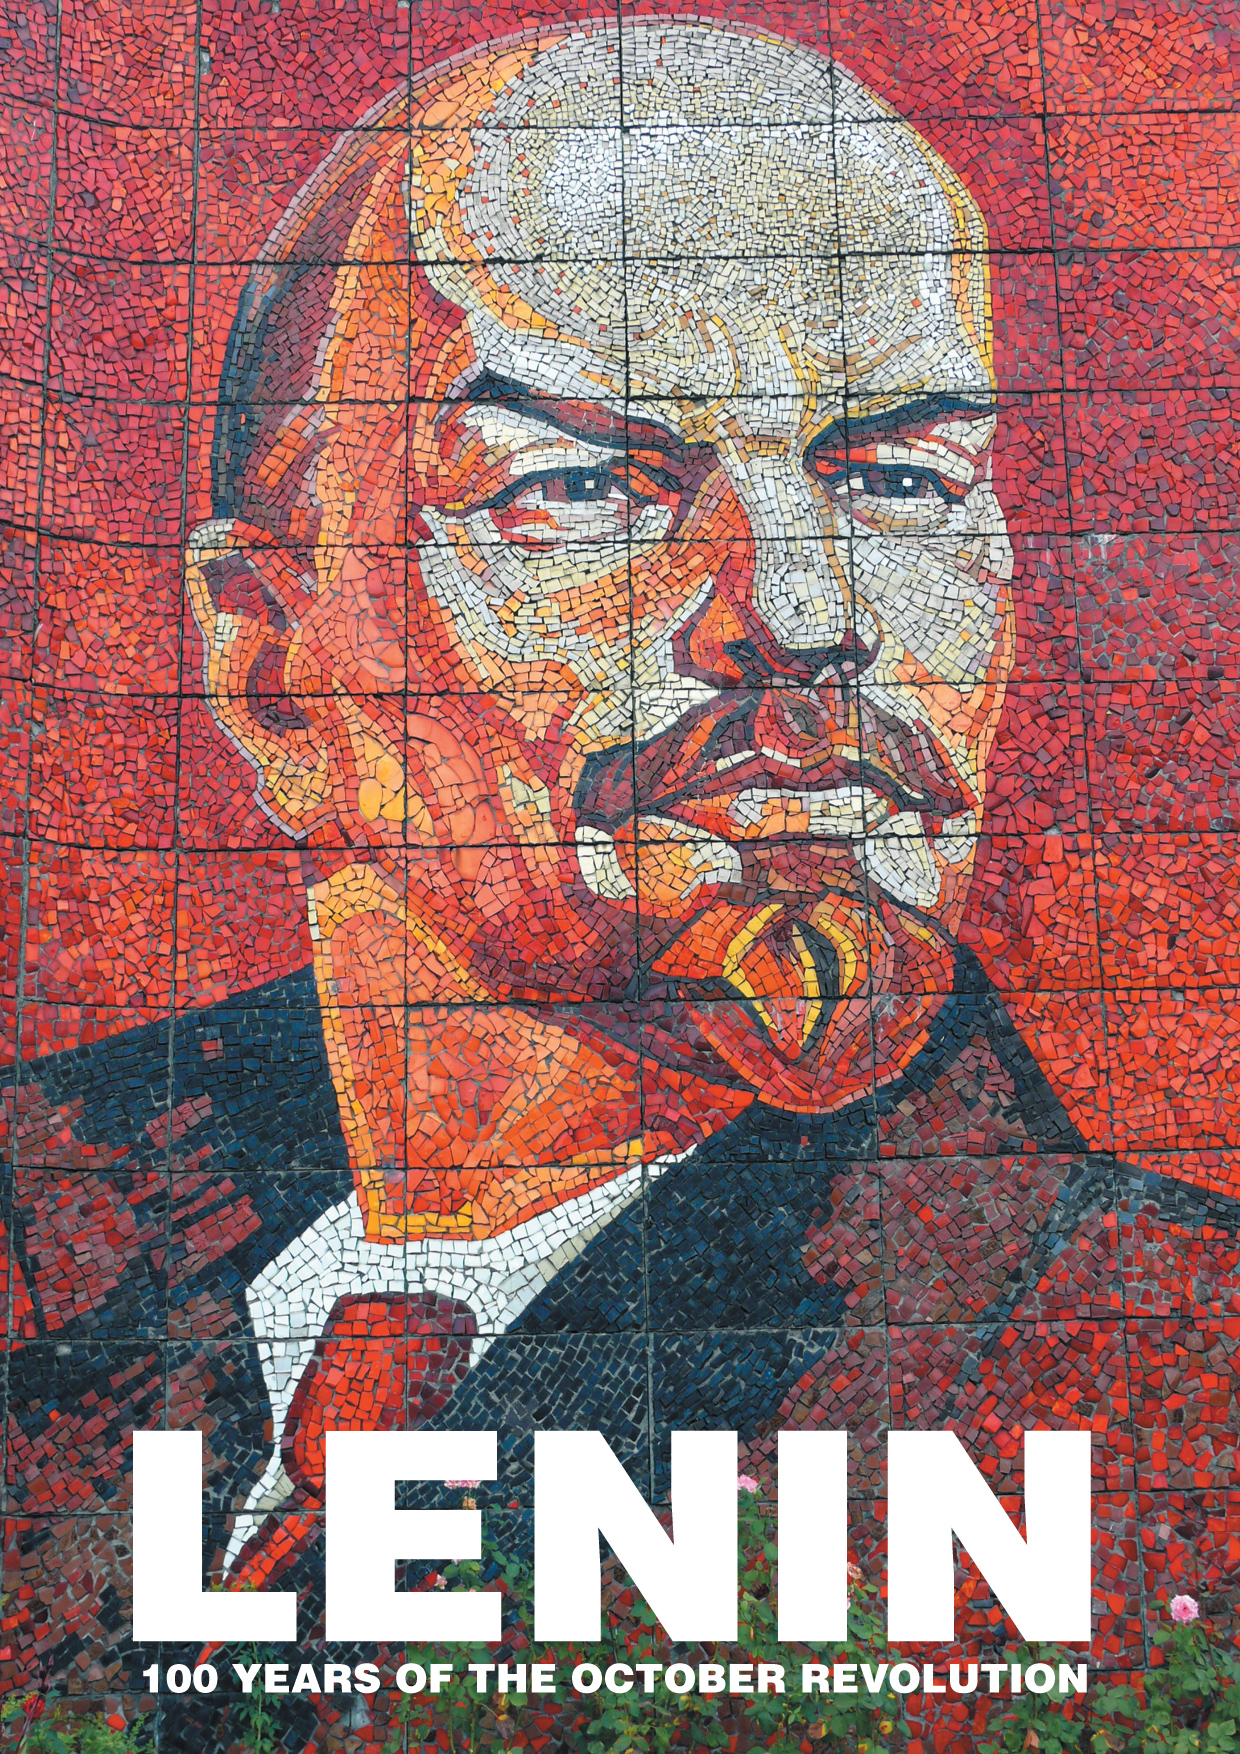 DOCUMENTARY FILM LENIN TO AIR ON IRANIAN PUBLIC TELEVISION